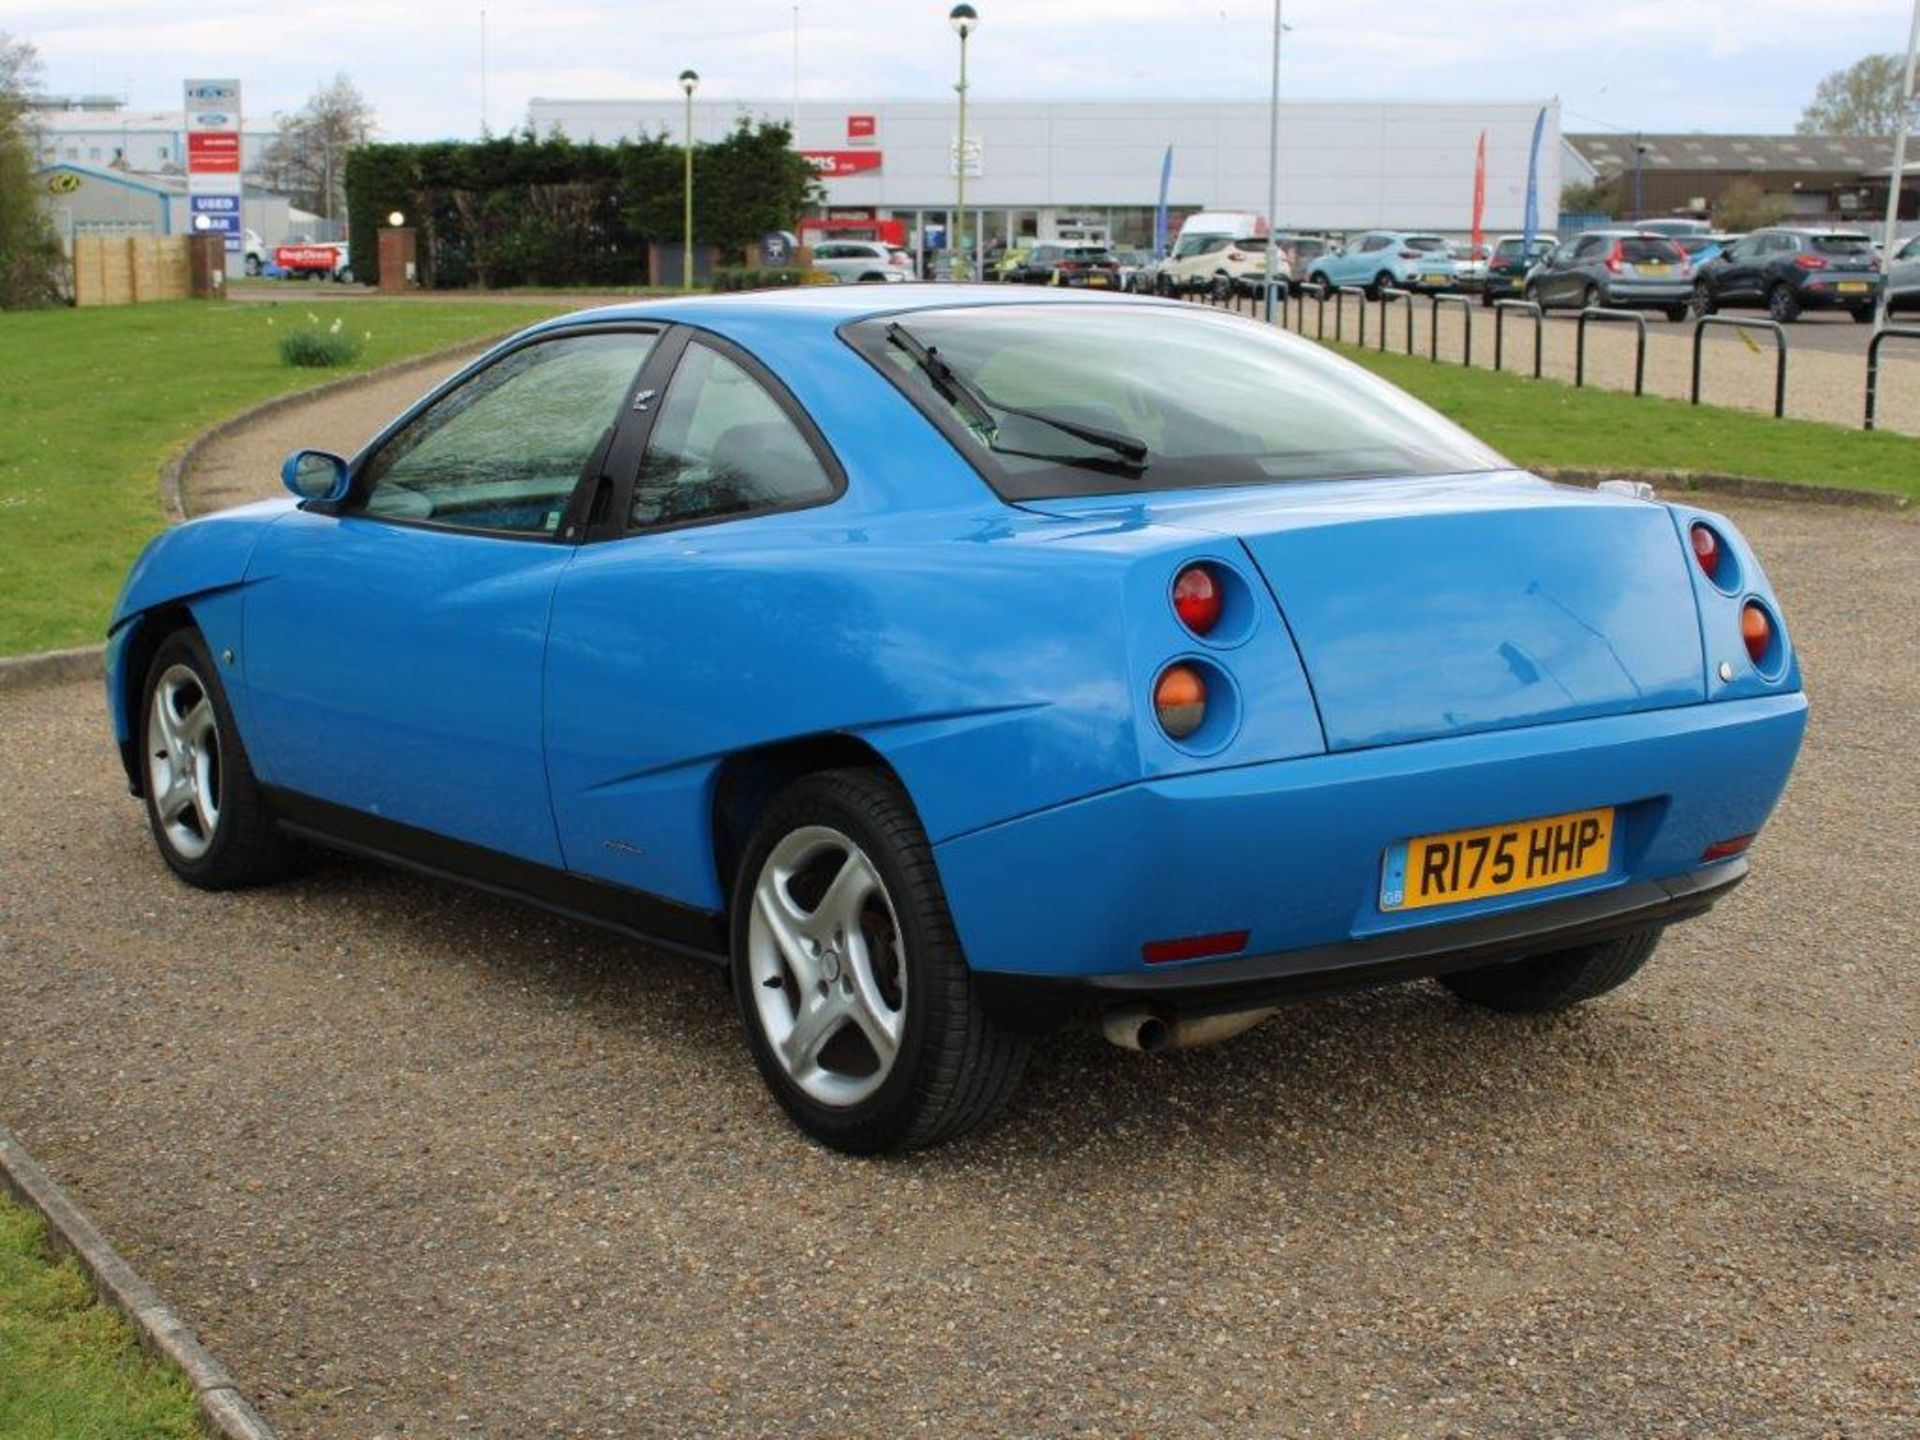 1997 Fiat Coupe 20V Turbo - Image 6 of 13